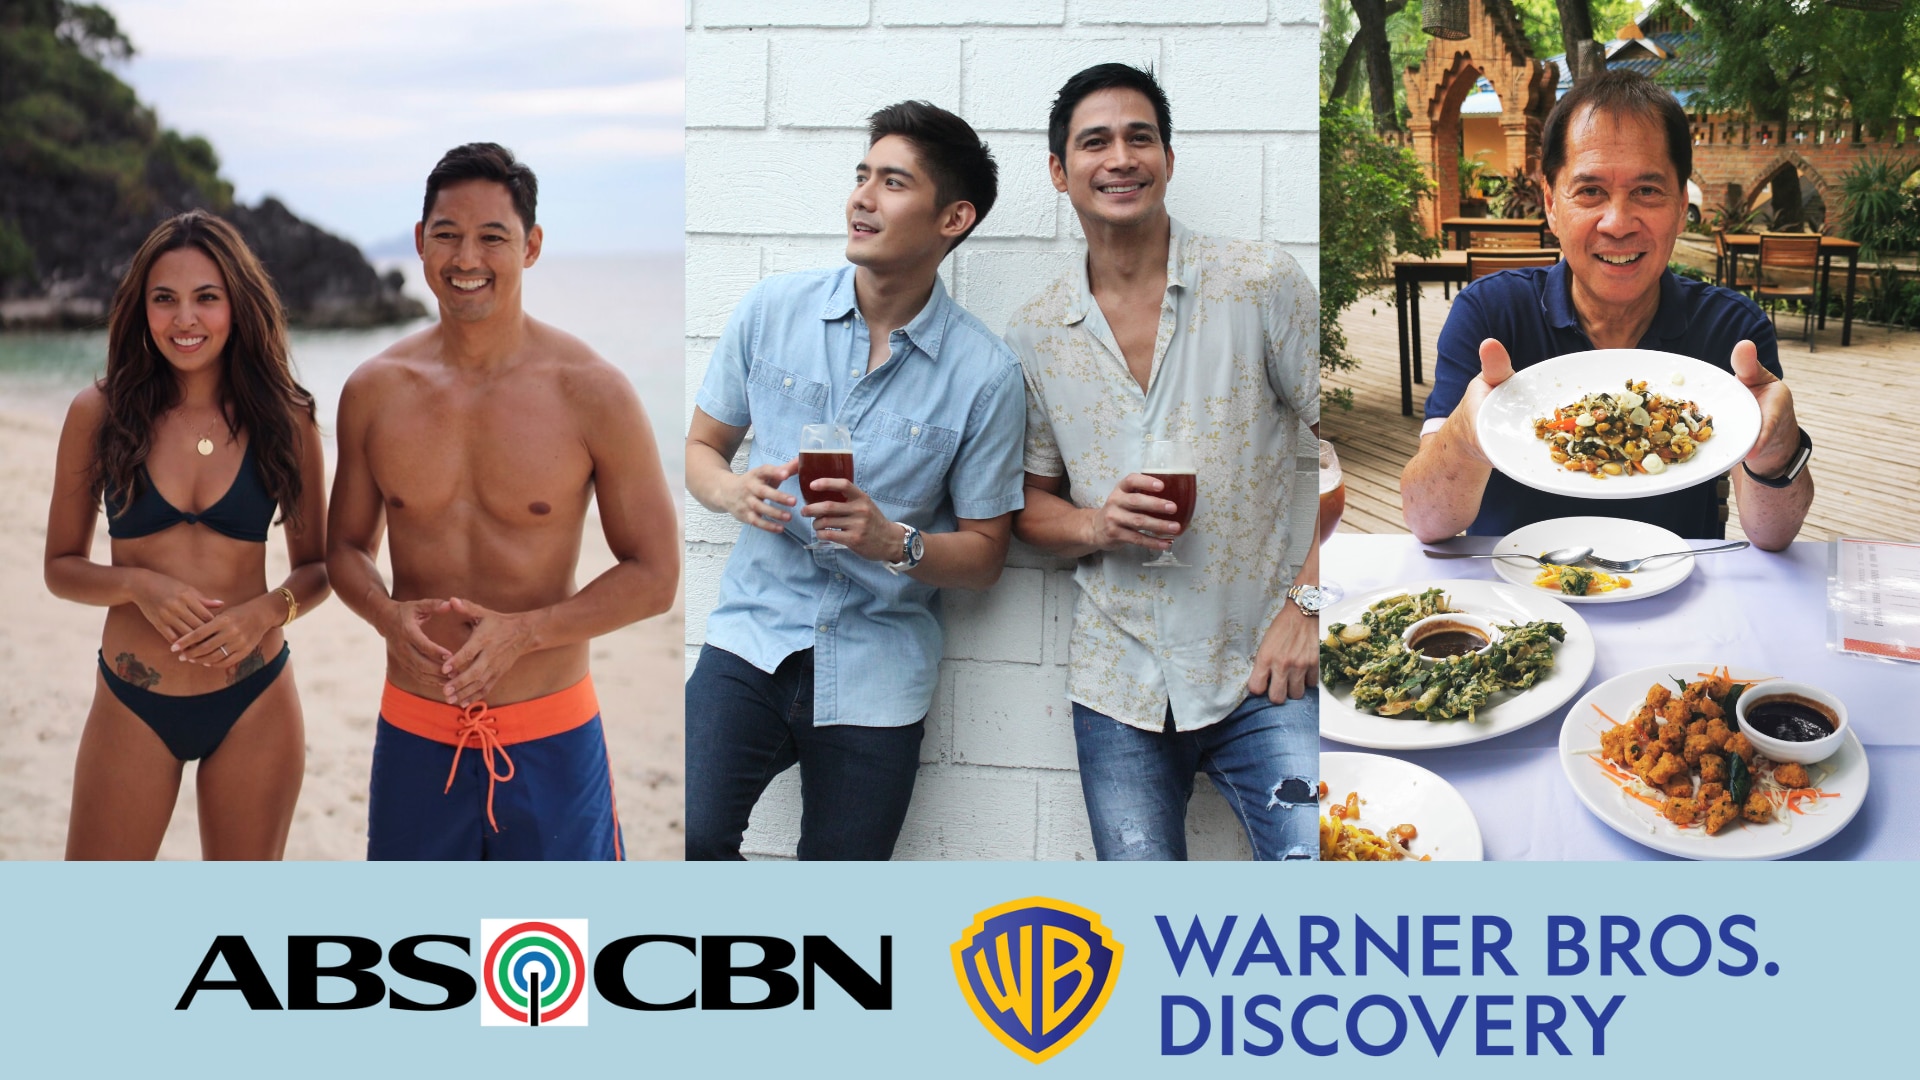 ABS CBN AND WARNER BROS  DISCOVERY INK DEAL TO AIR LIFESTYLE SHOWS ACROSS ASIA